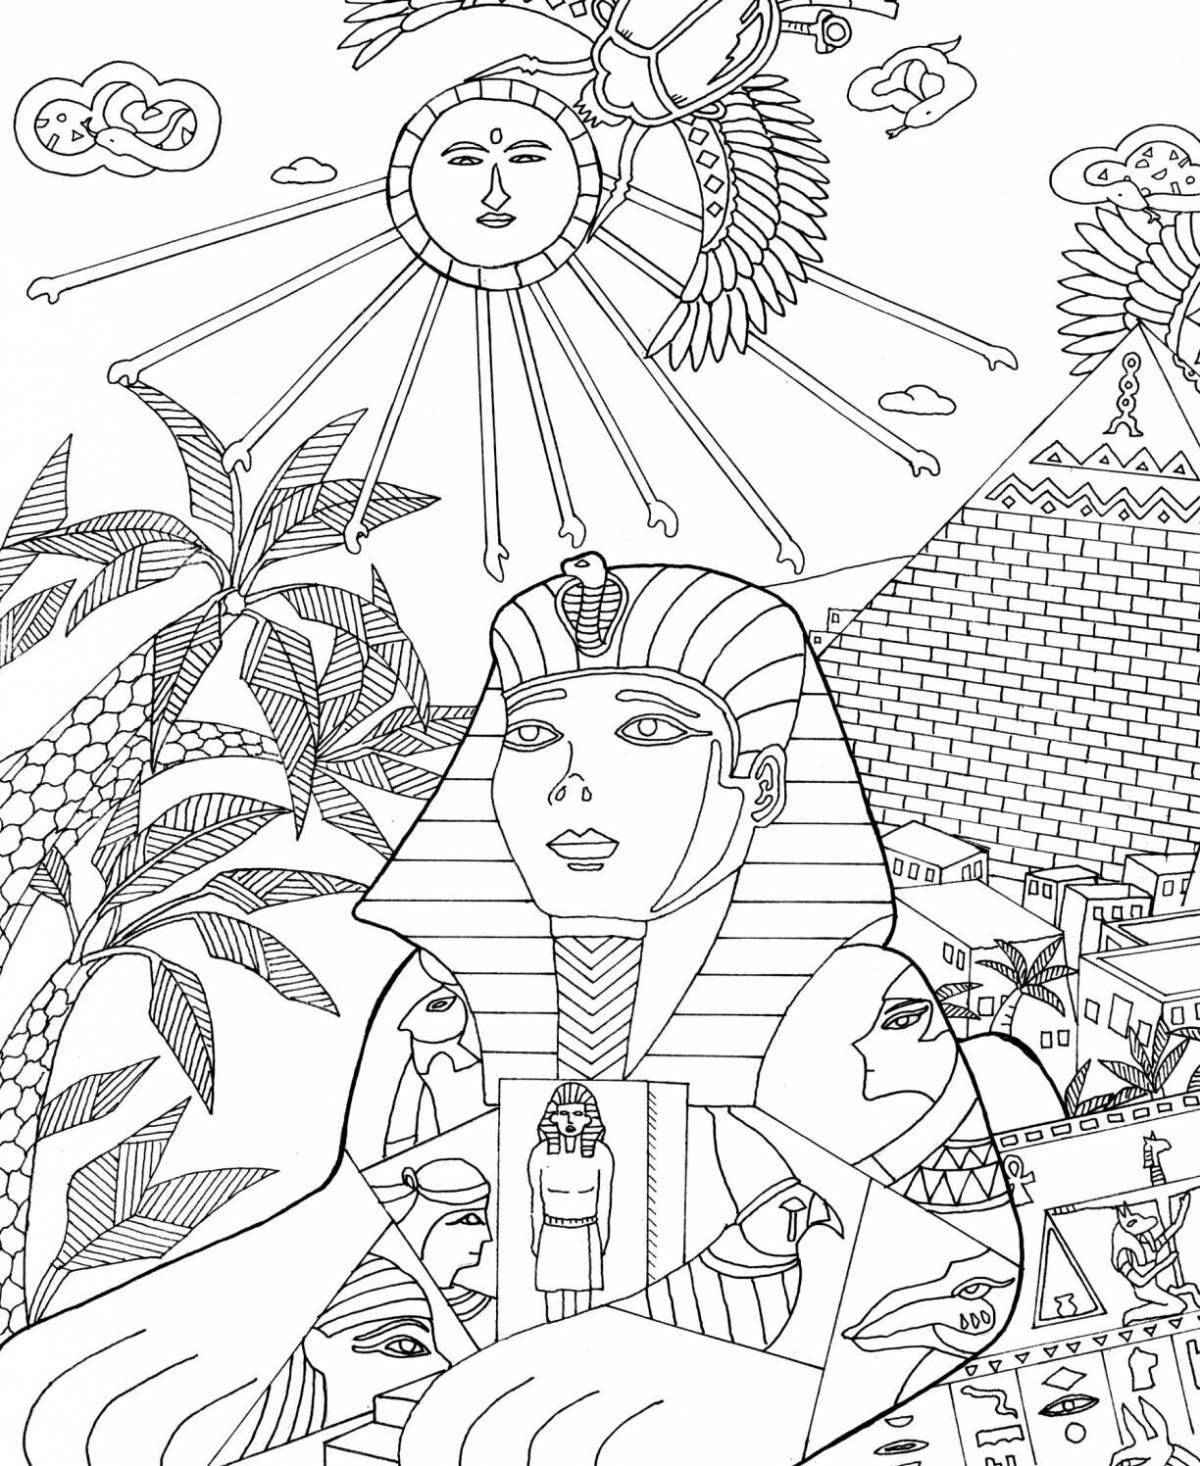 Gorgeous ancient egypt coloring book